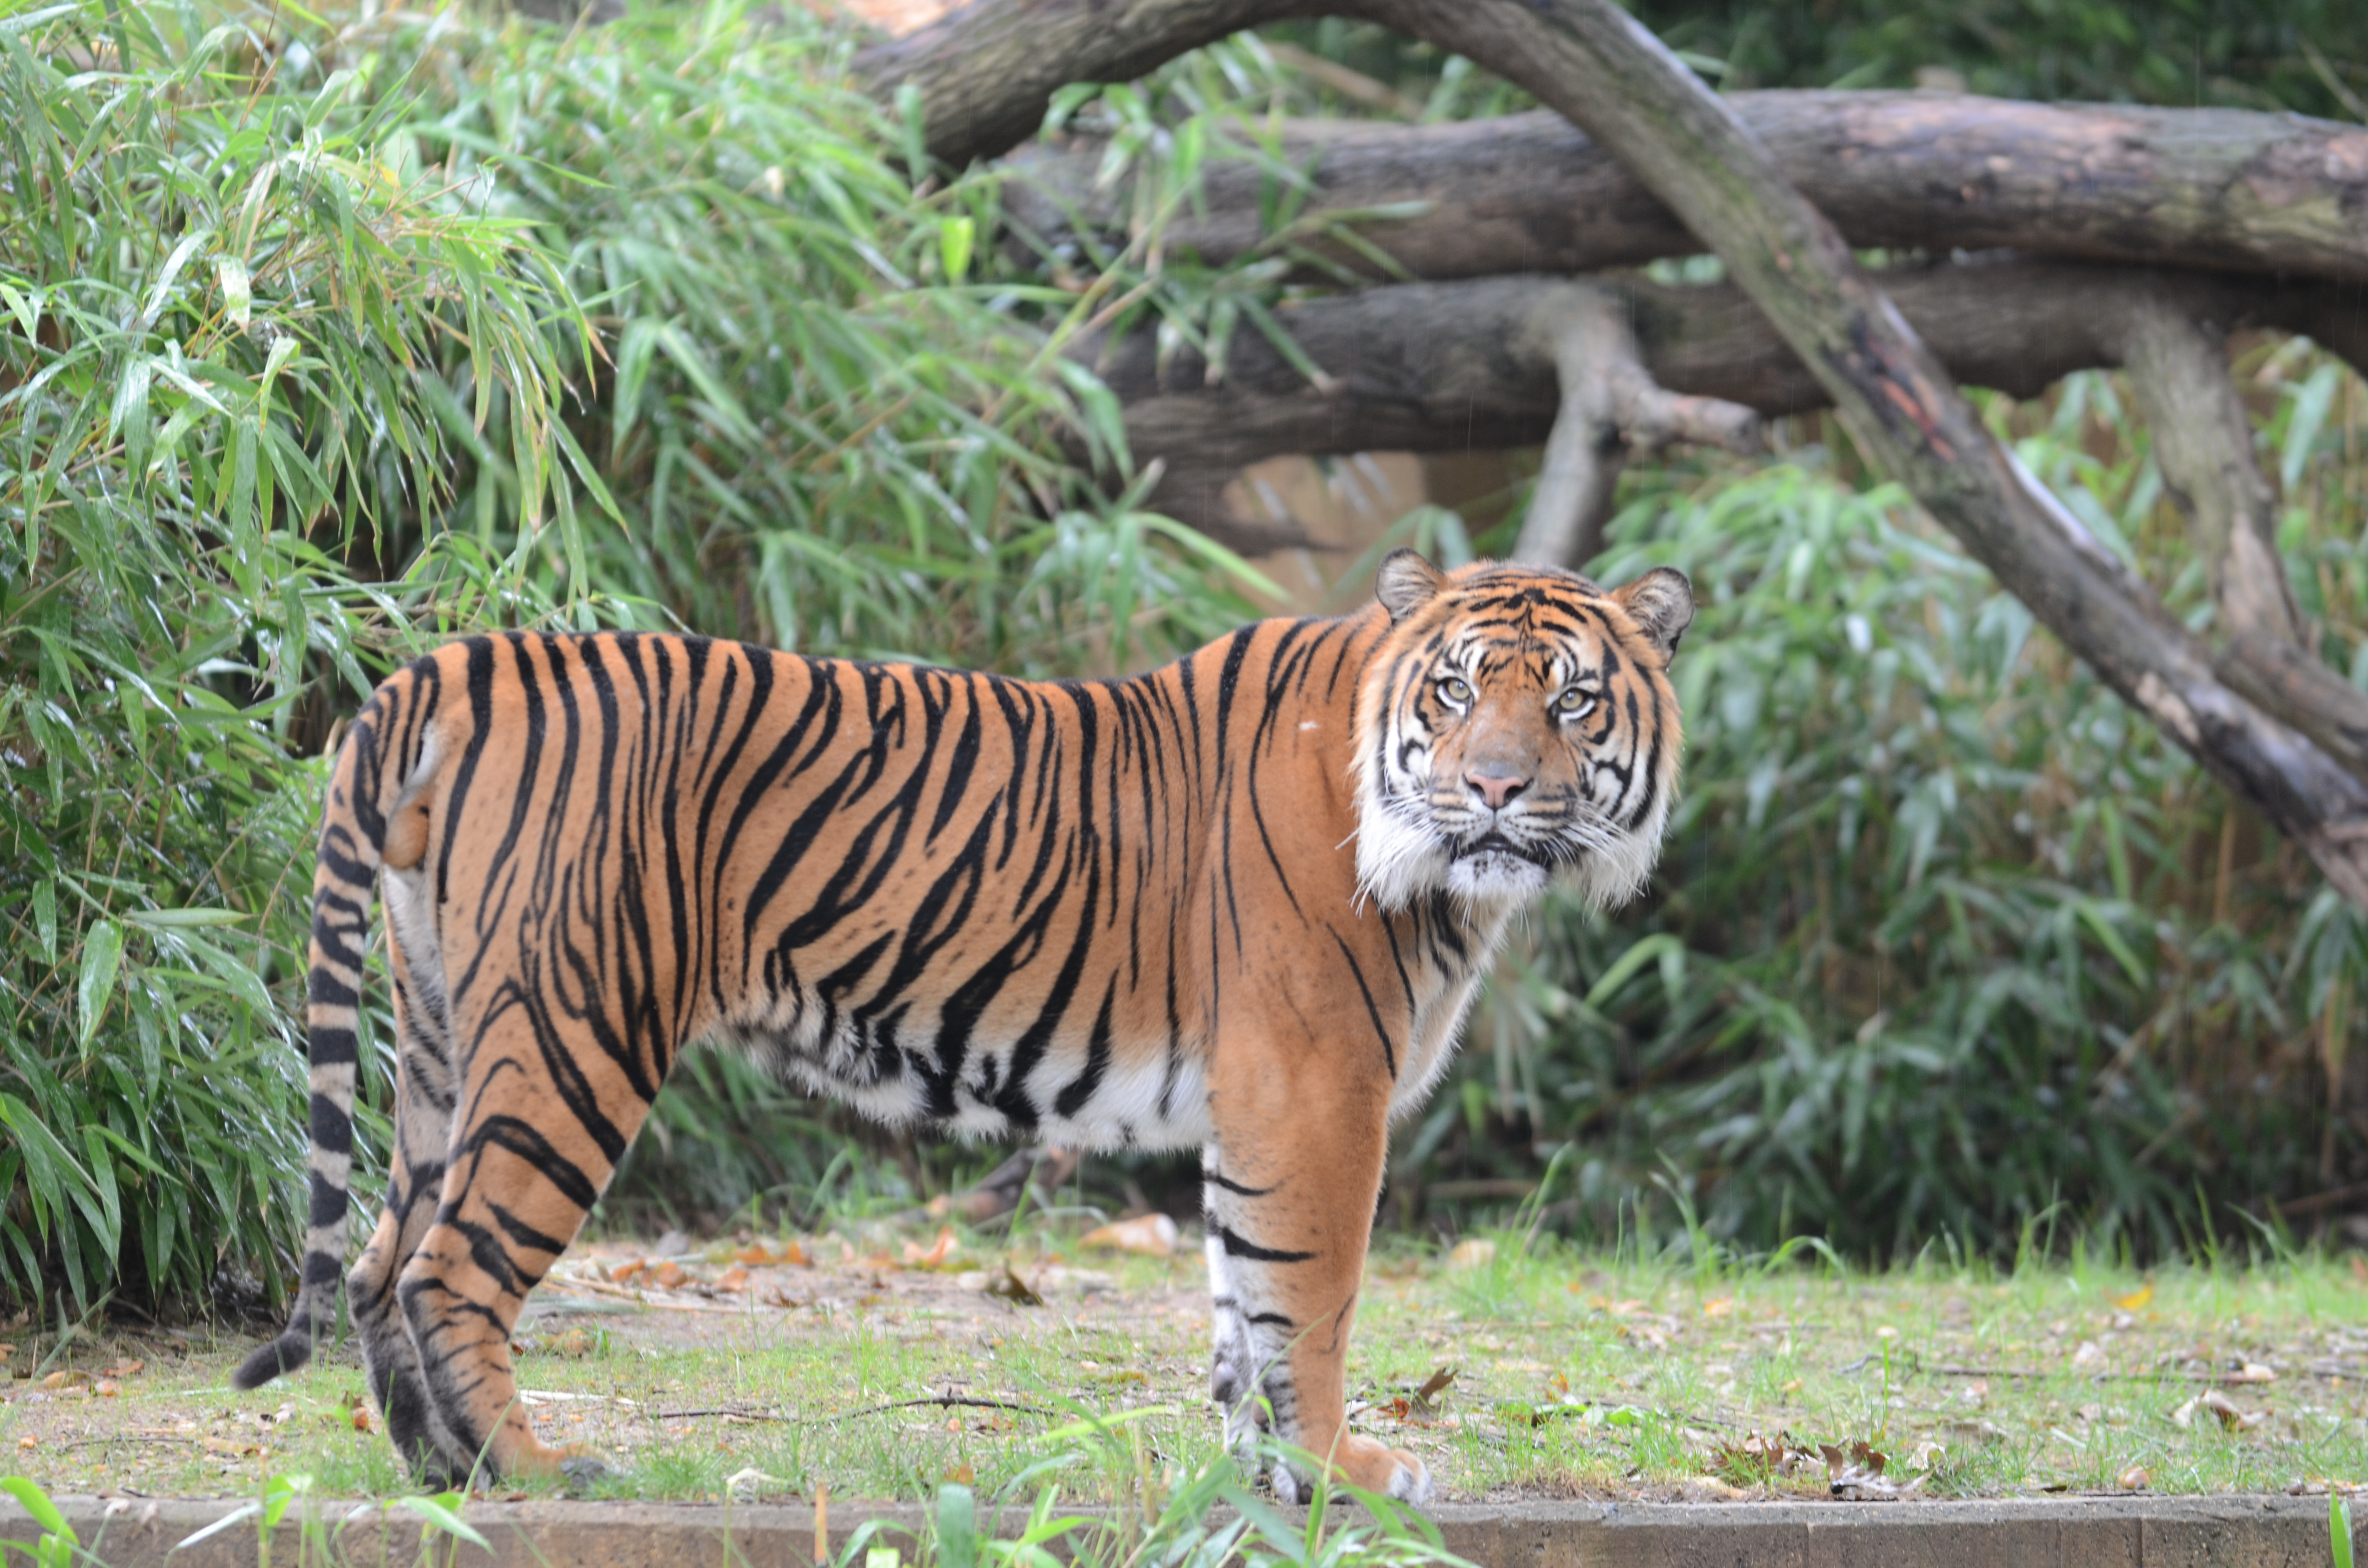 Wide shot of an Amur tiger looking at the camera.